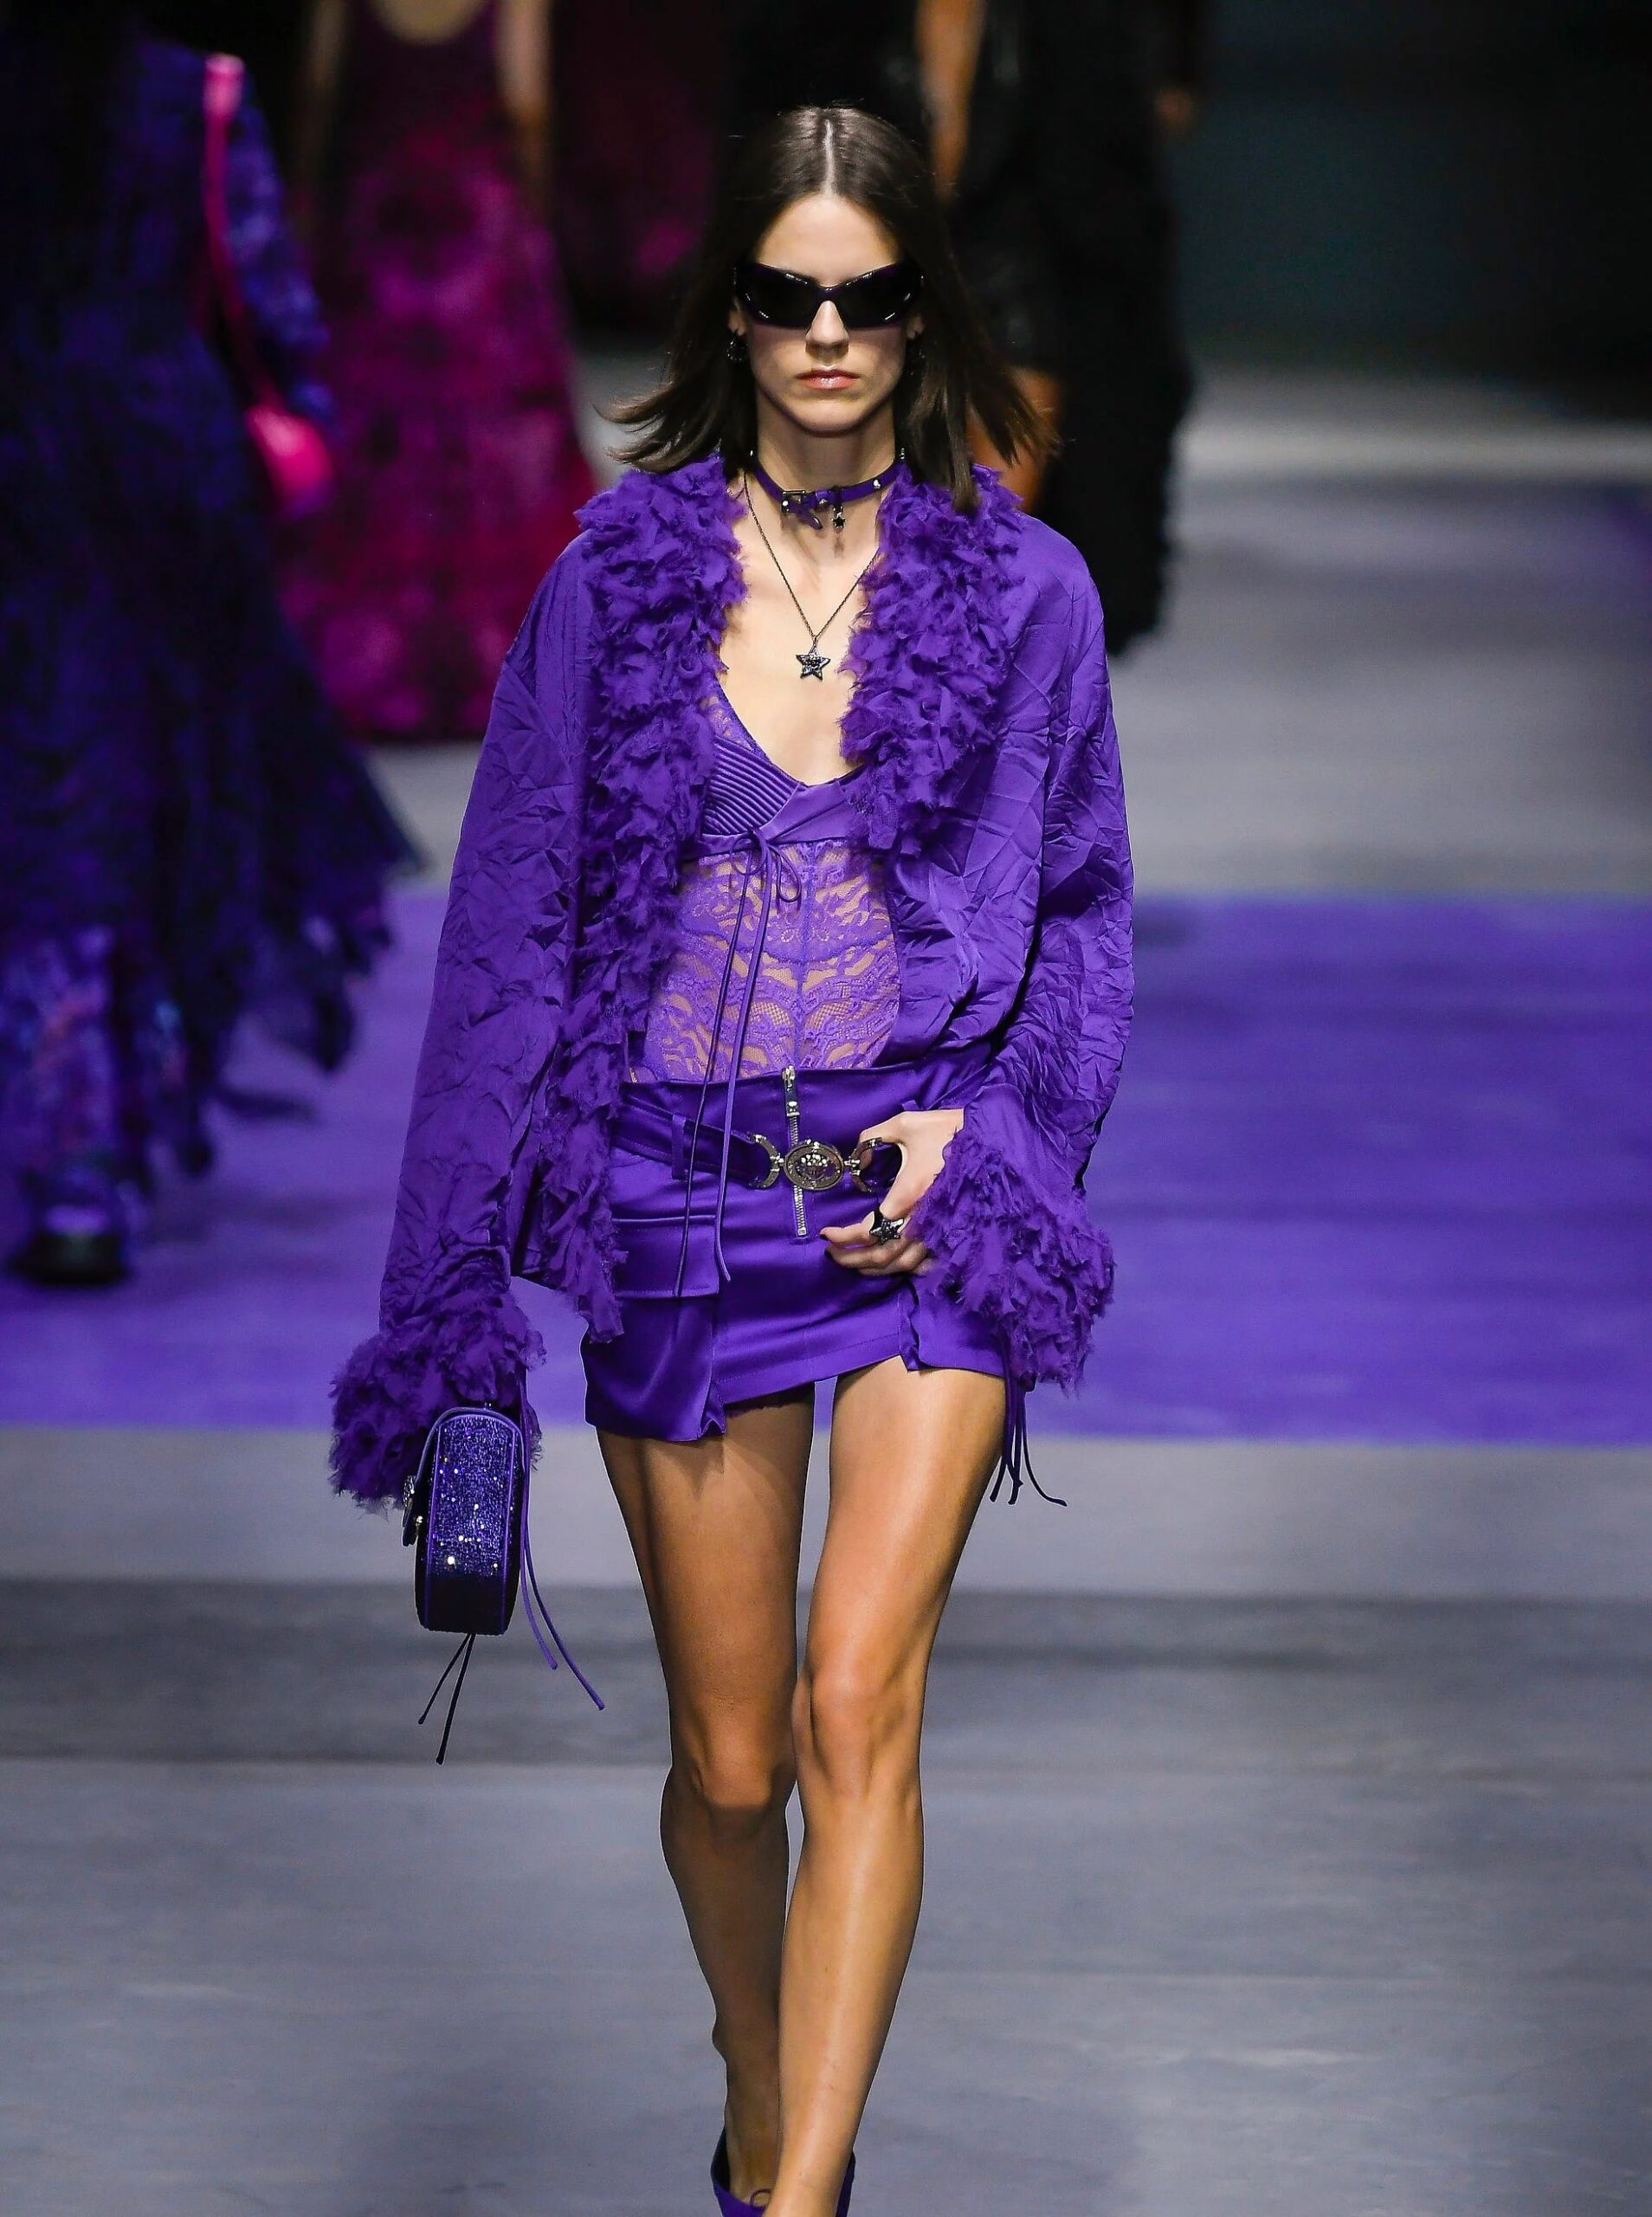 Versace has unveiled a bold